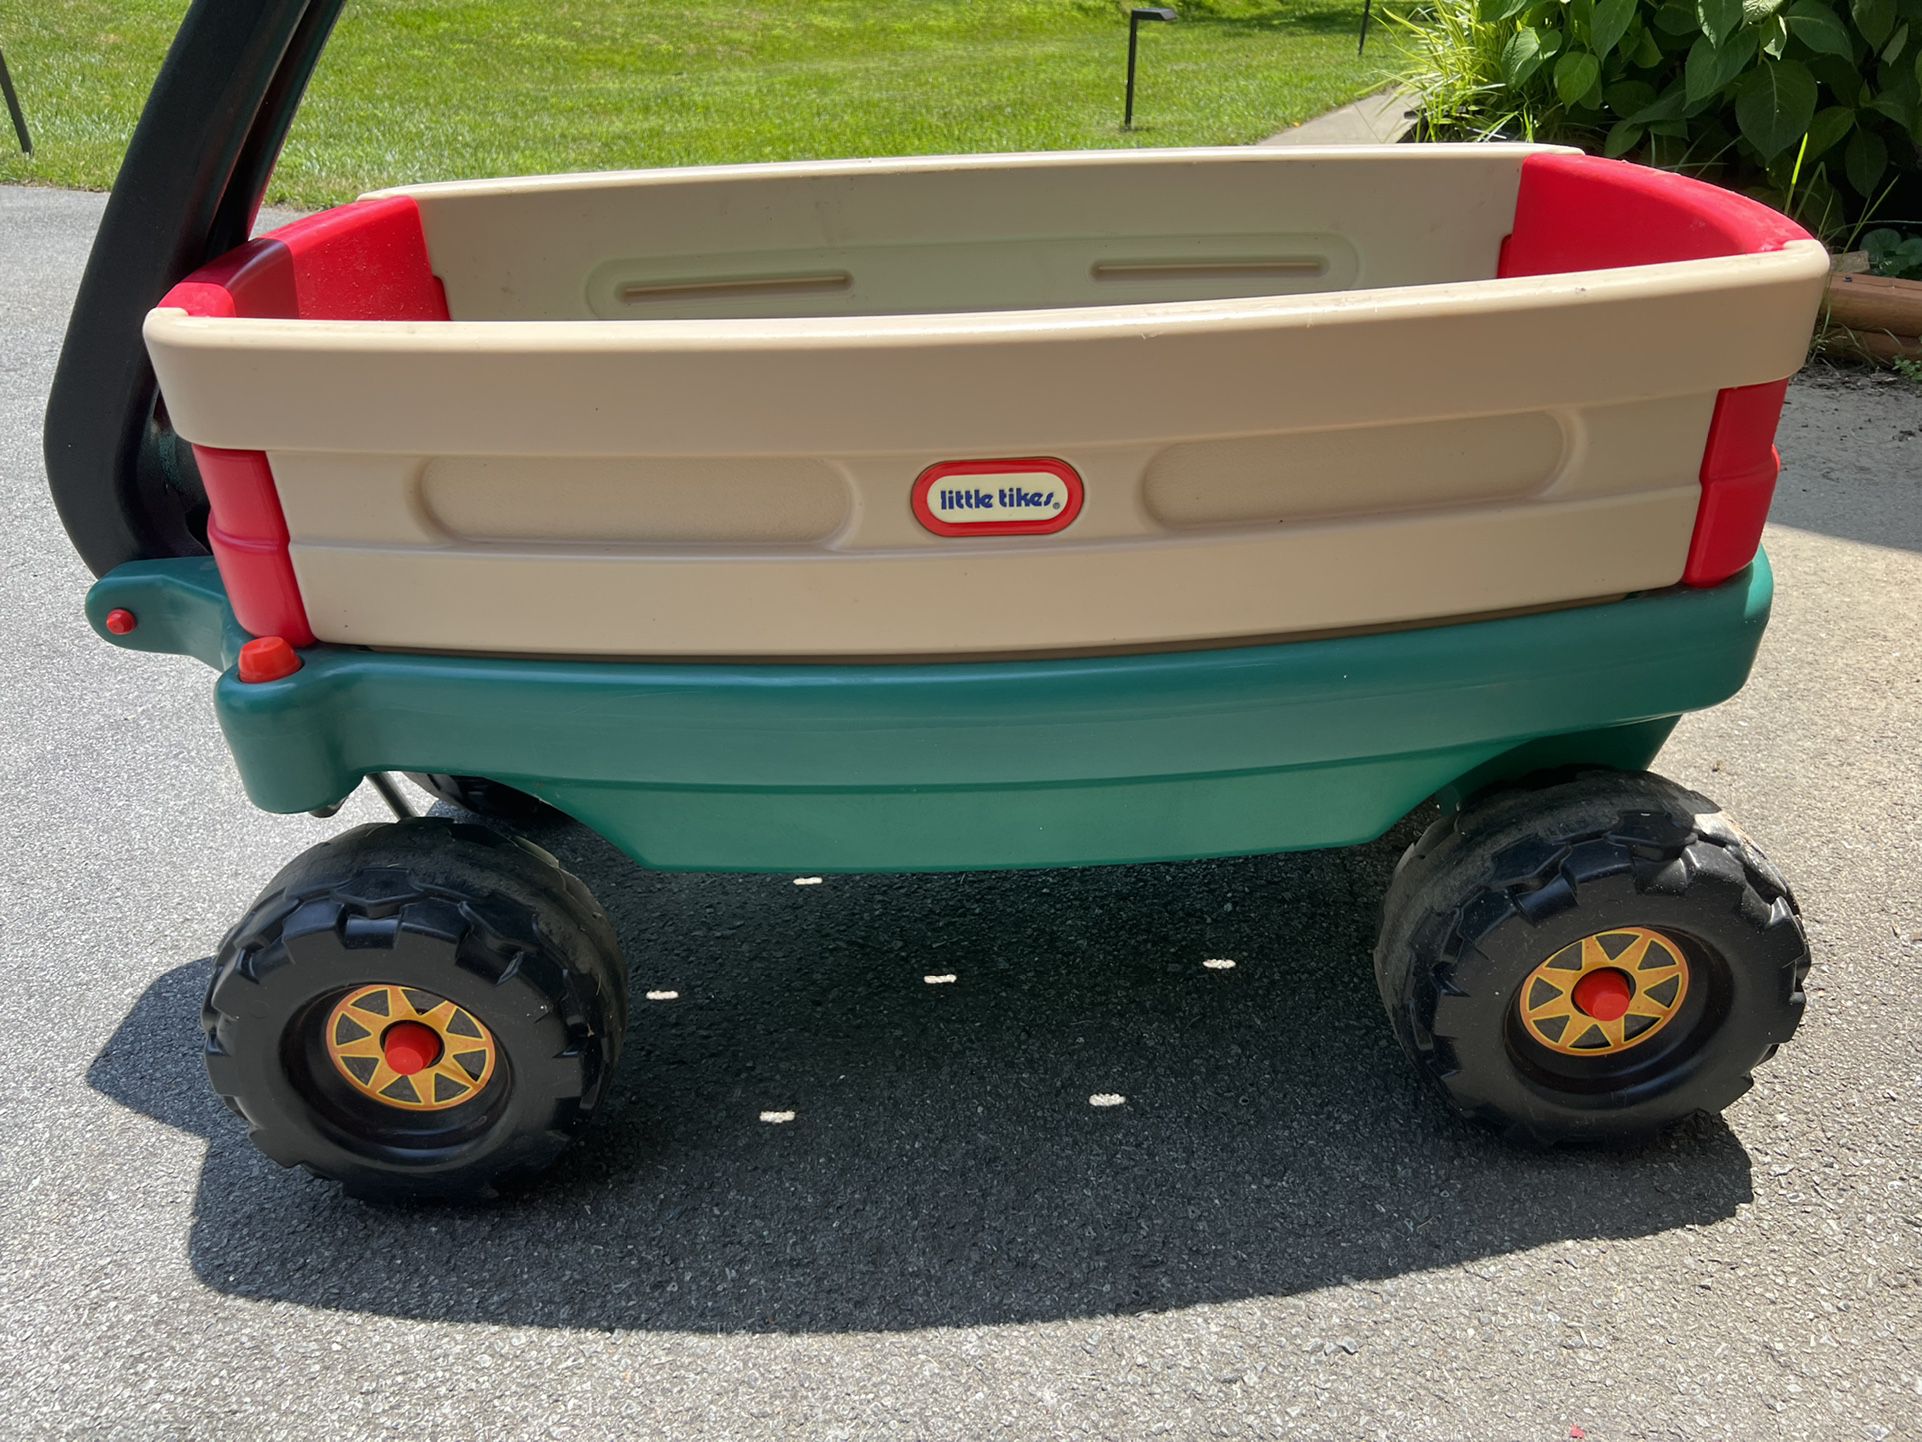 Little Tikes Wagon- For Kids, Toys, Items For The Beach 